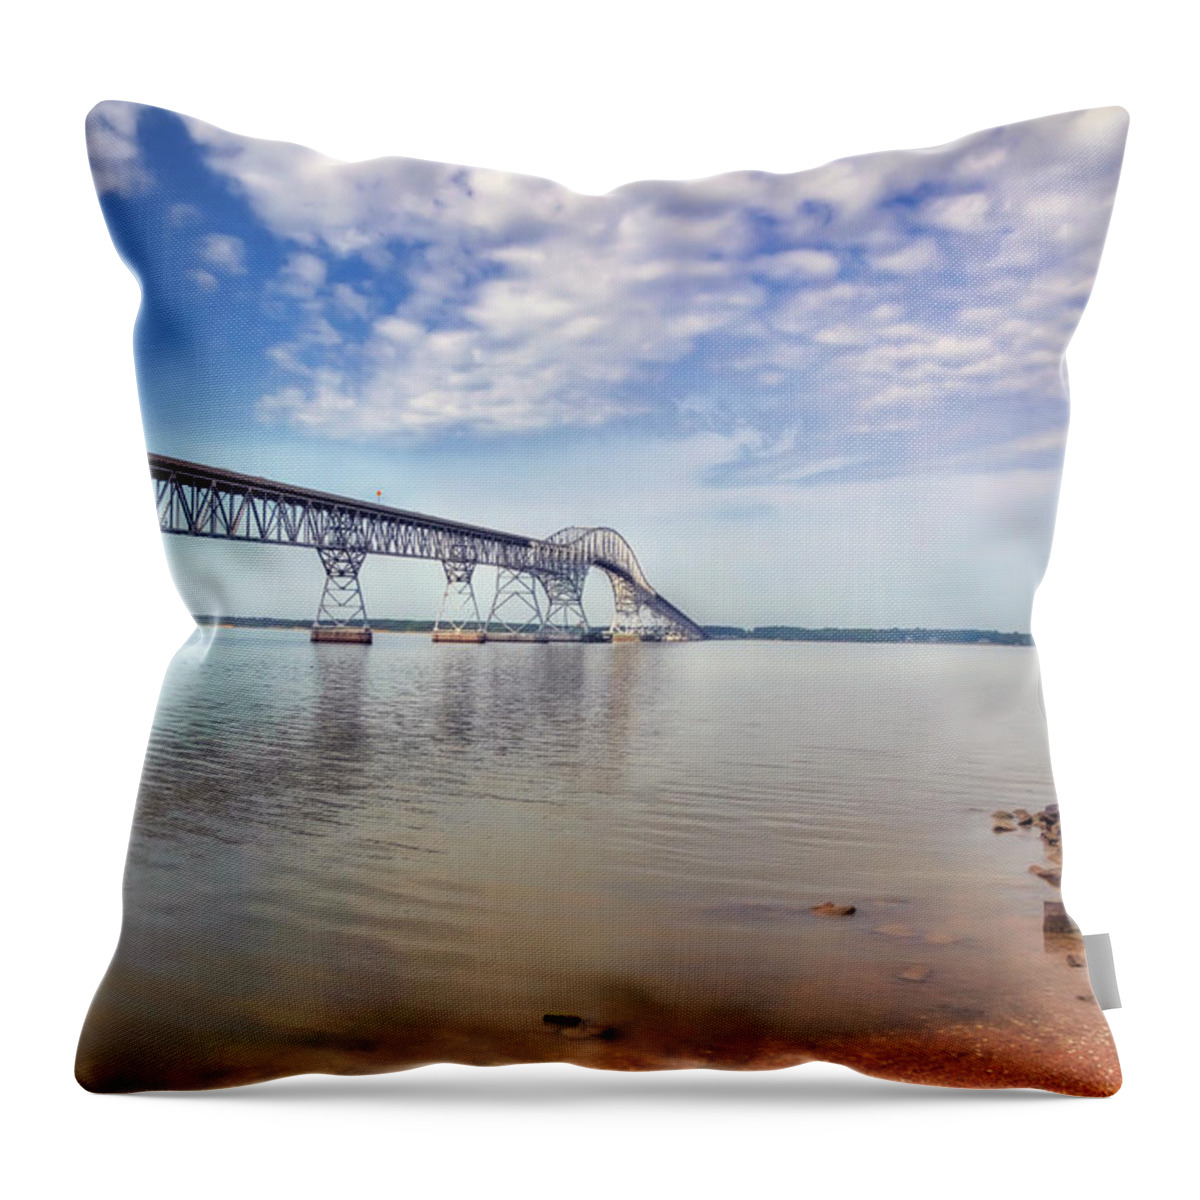 Tranquility Throw Pillow featuring the photograph Harry Nice Bridge by Photo By Bill Hutchins